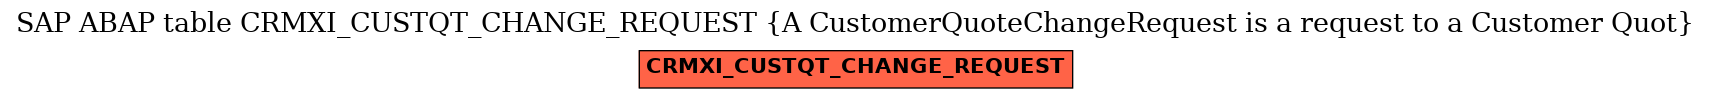 E-R Diagram for table CRMXI_CUSTQT_CHANGE_REQUEST (A CustomerQuoteChangeRequest is a request to a Customer Quot)